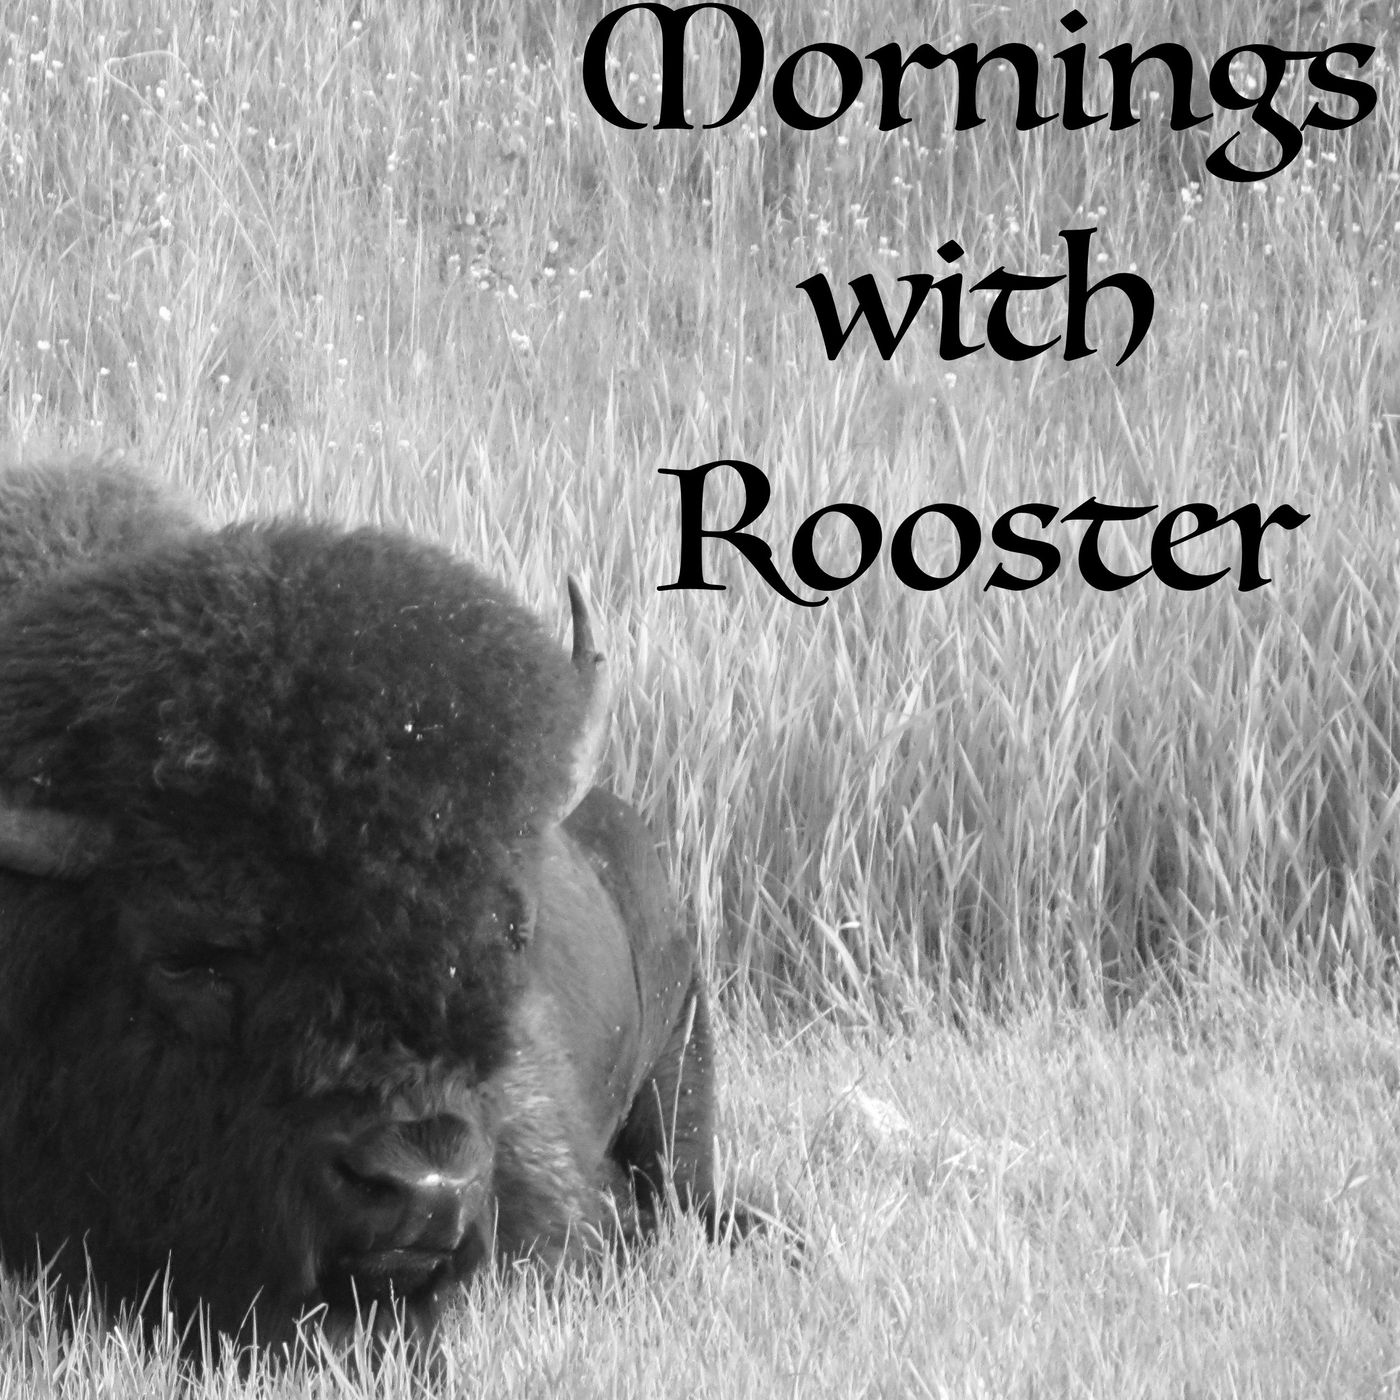 Mornings with Rooster